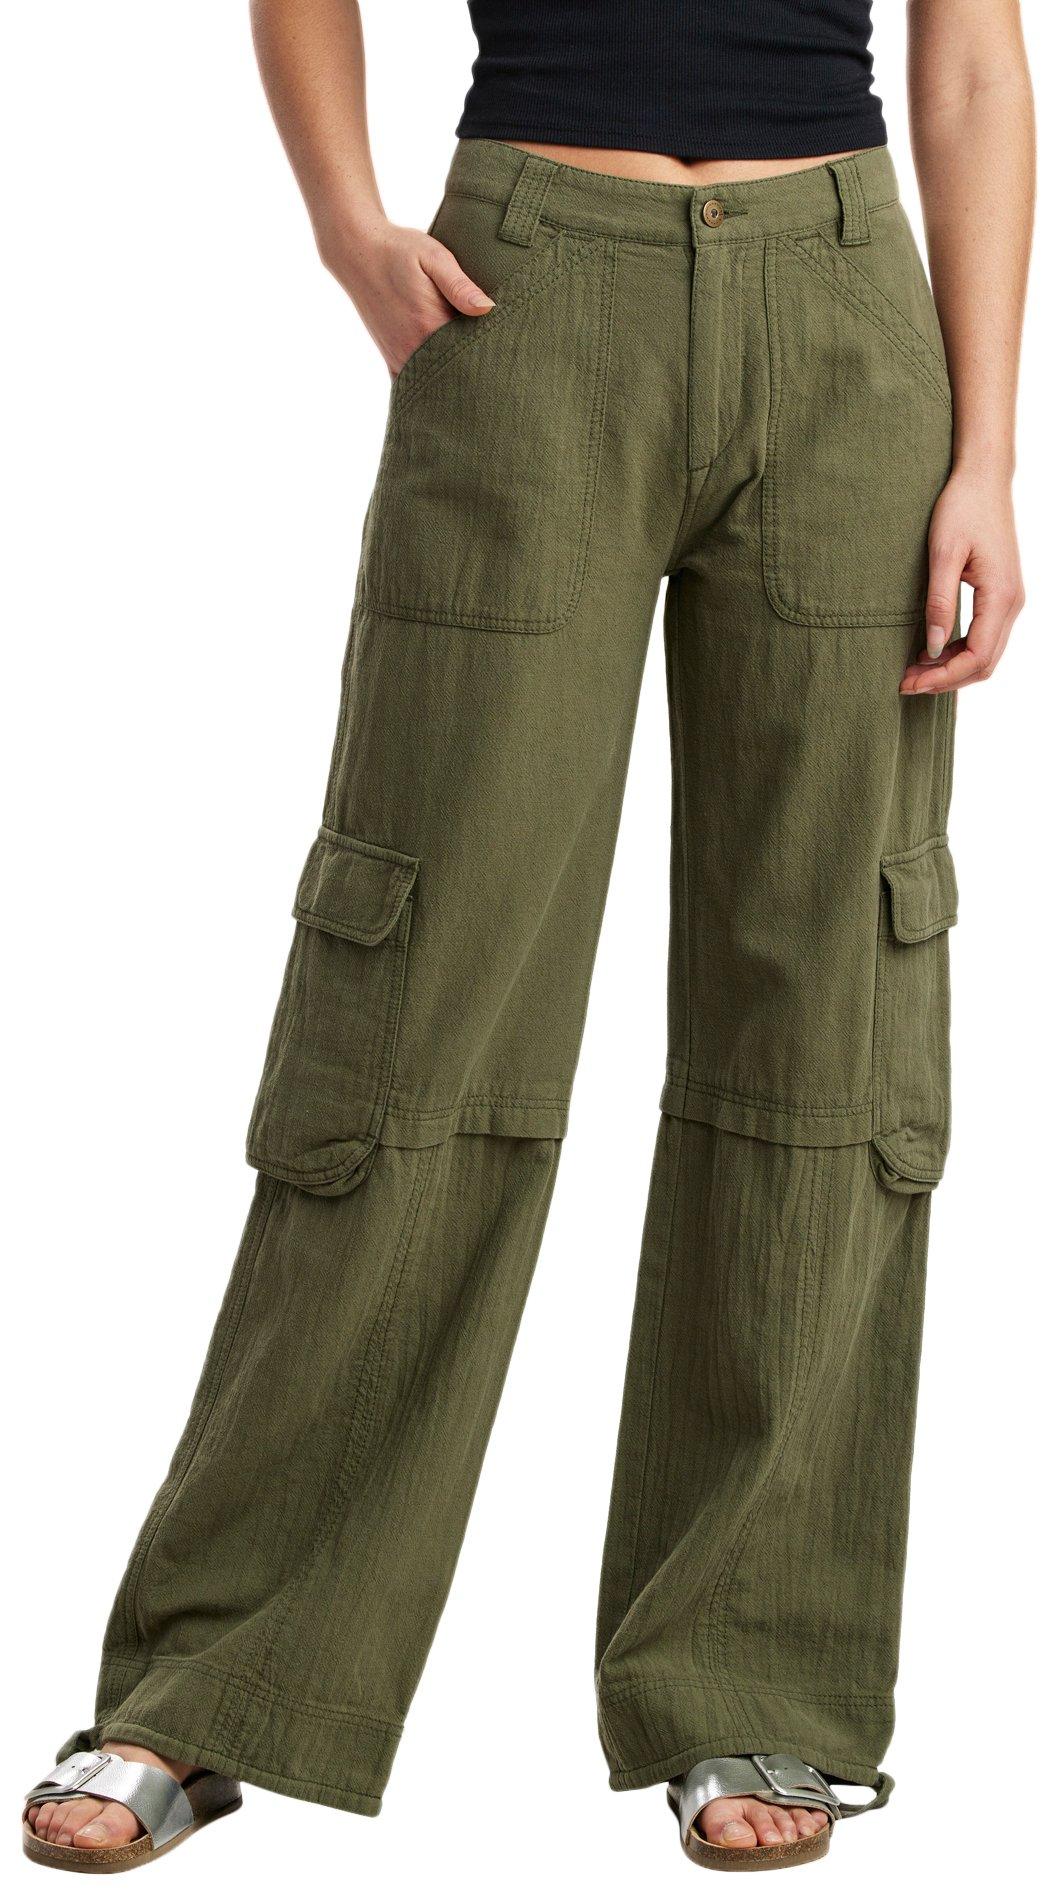 Supplies by Union Bay Women's Solid Wide Leg Cargo Pants